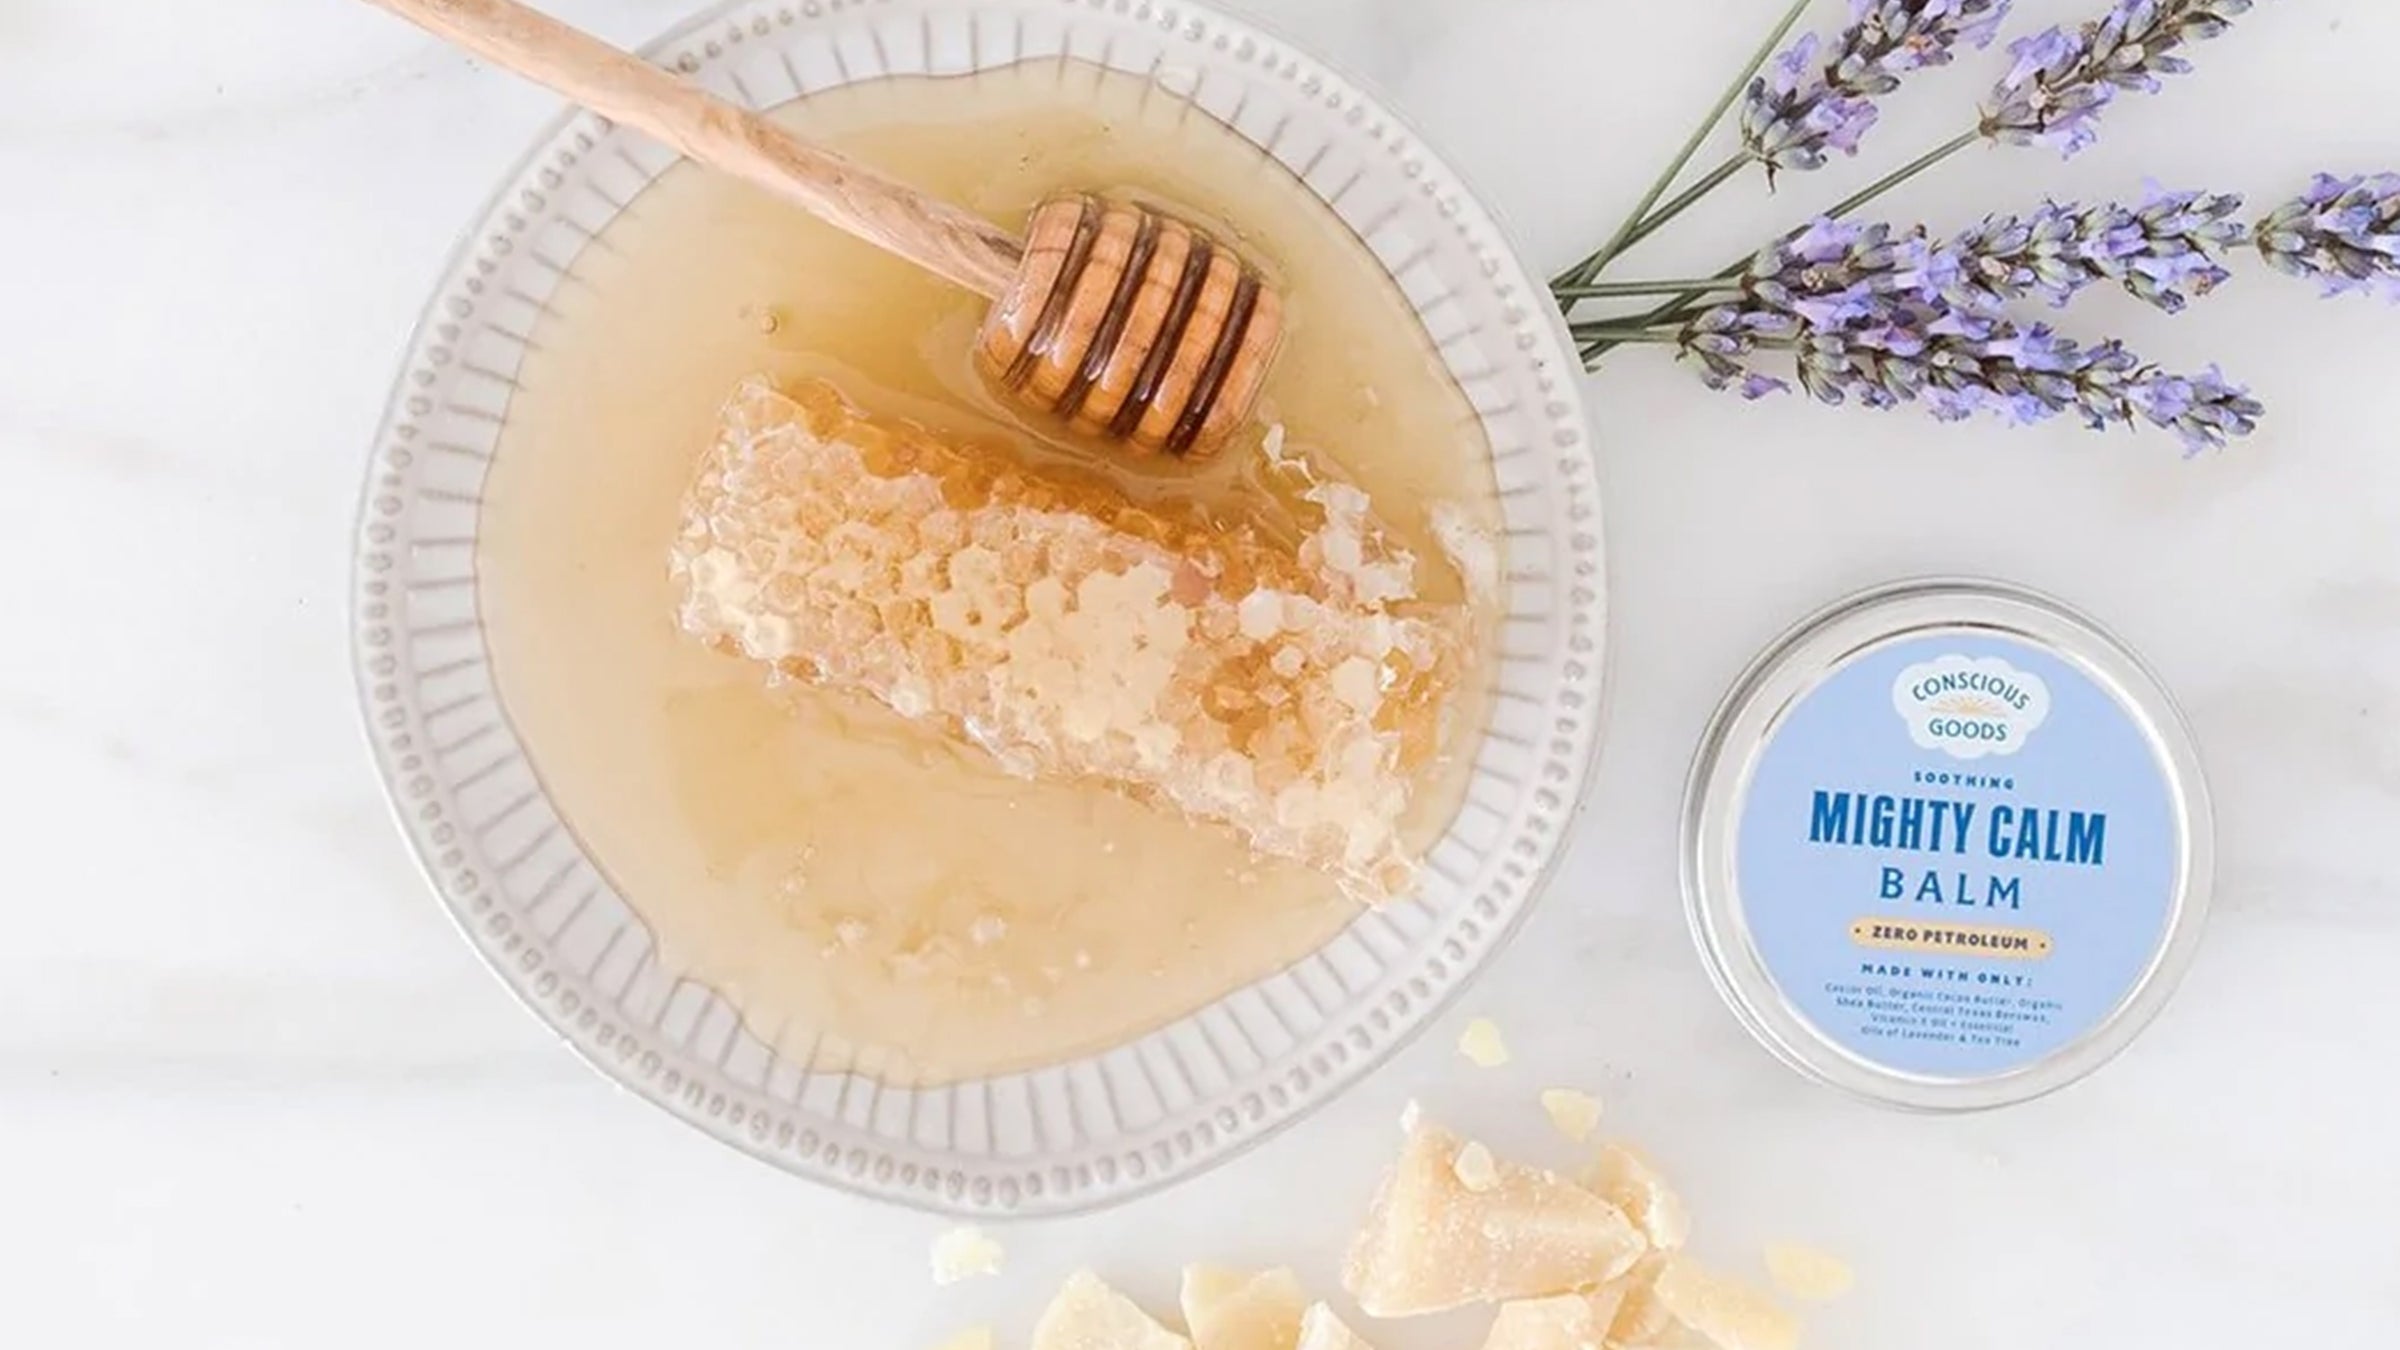 Conscious Goods Mighty Calm Balm on marble countertop with honey, lavender, and wax